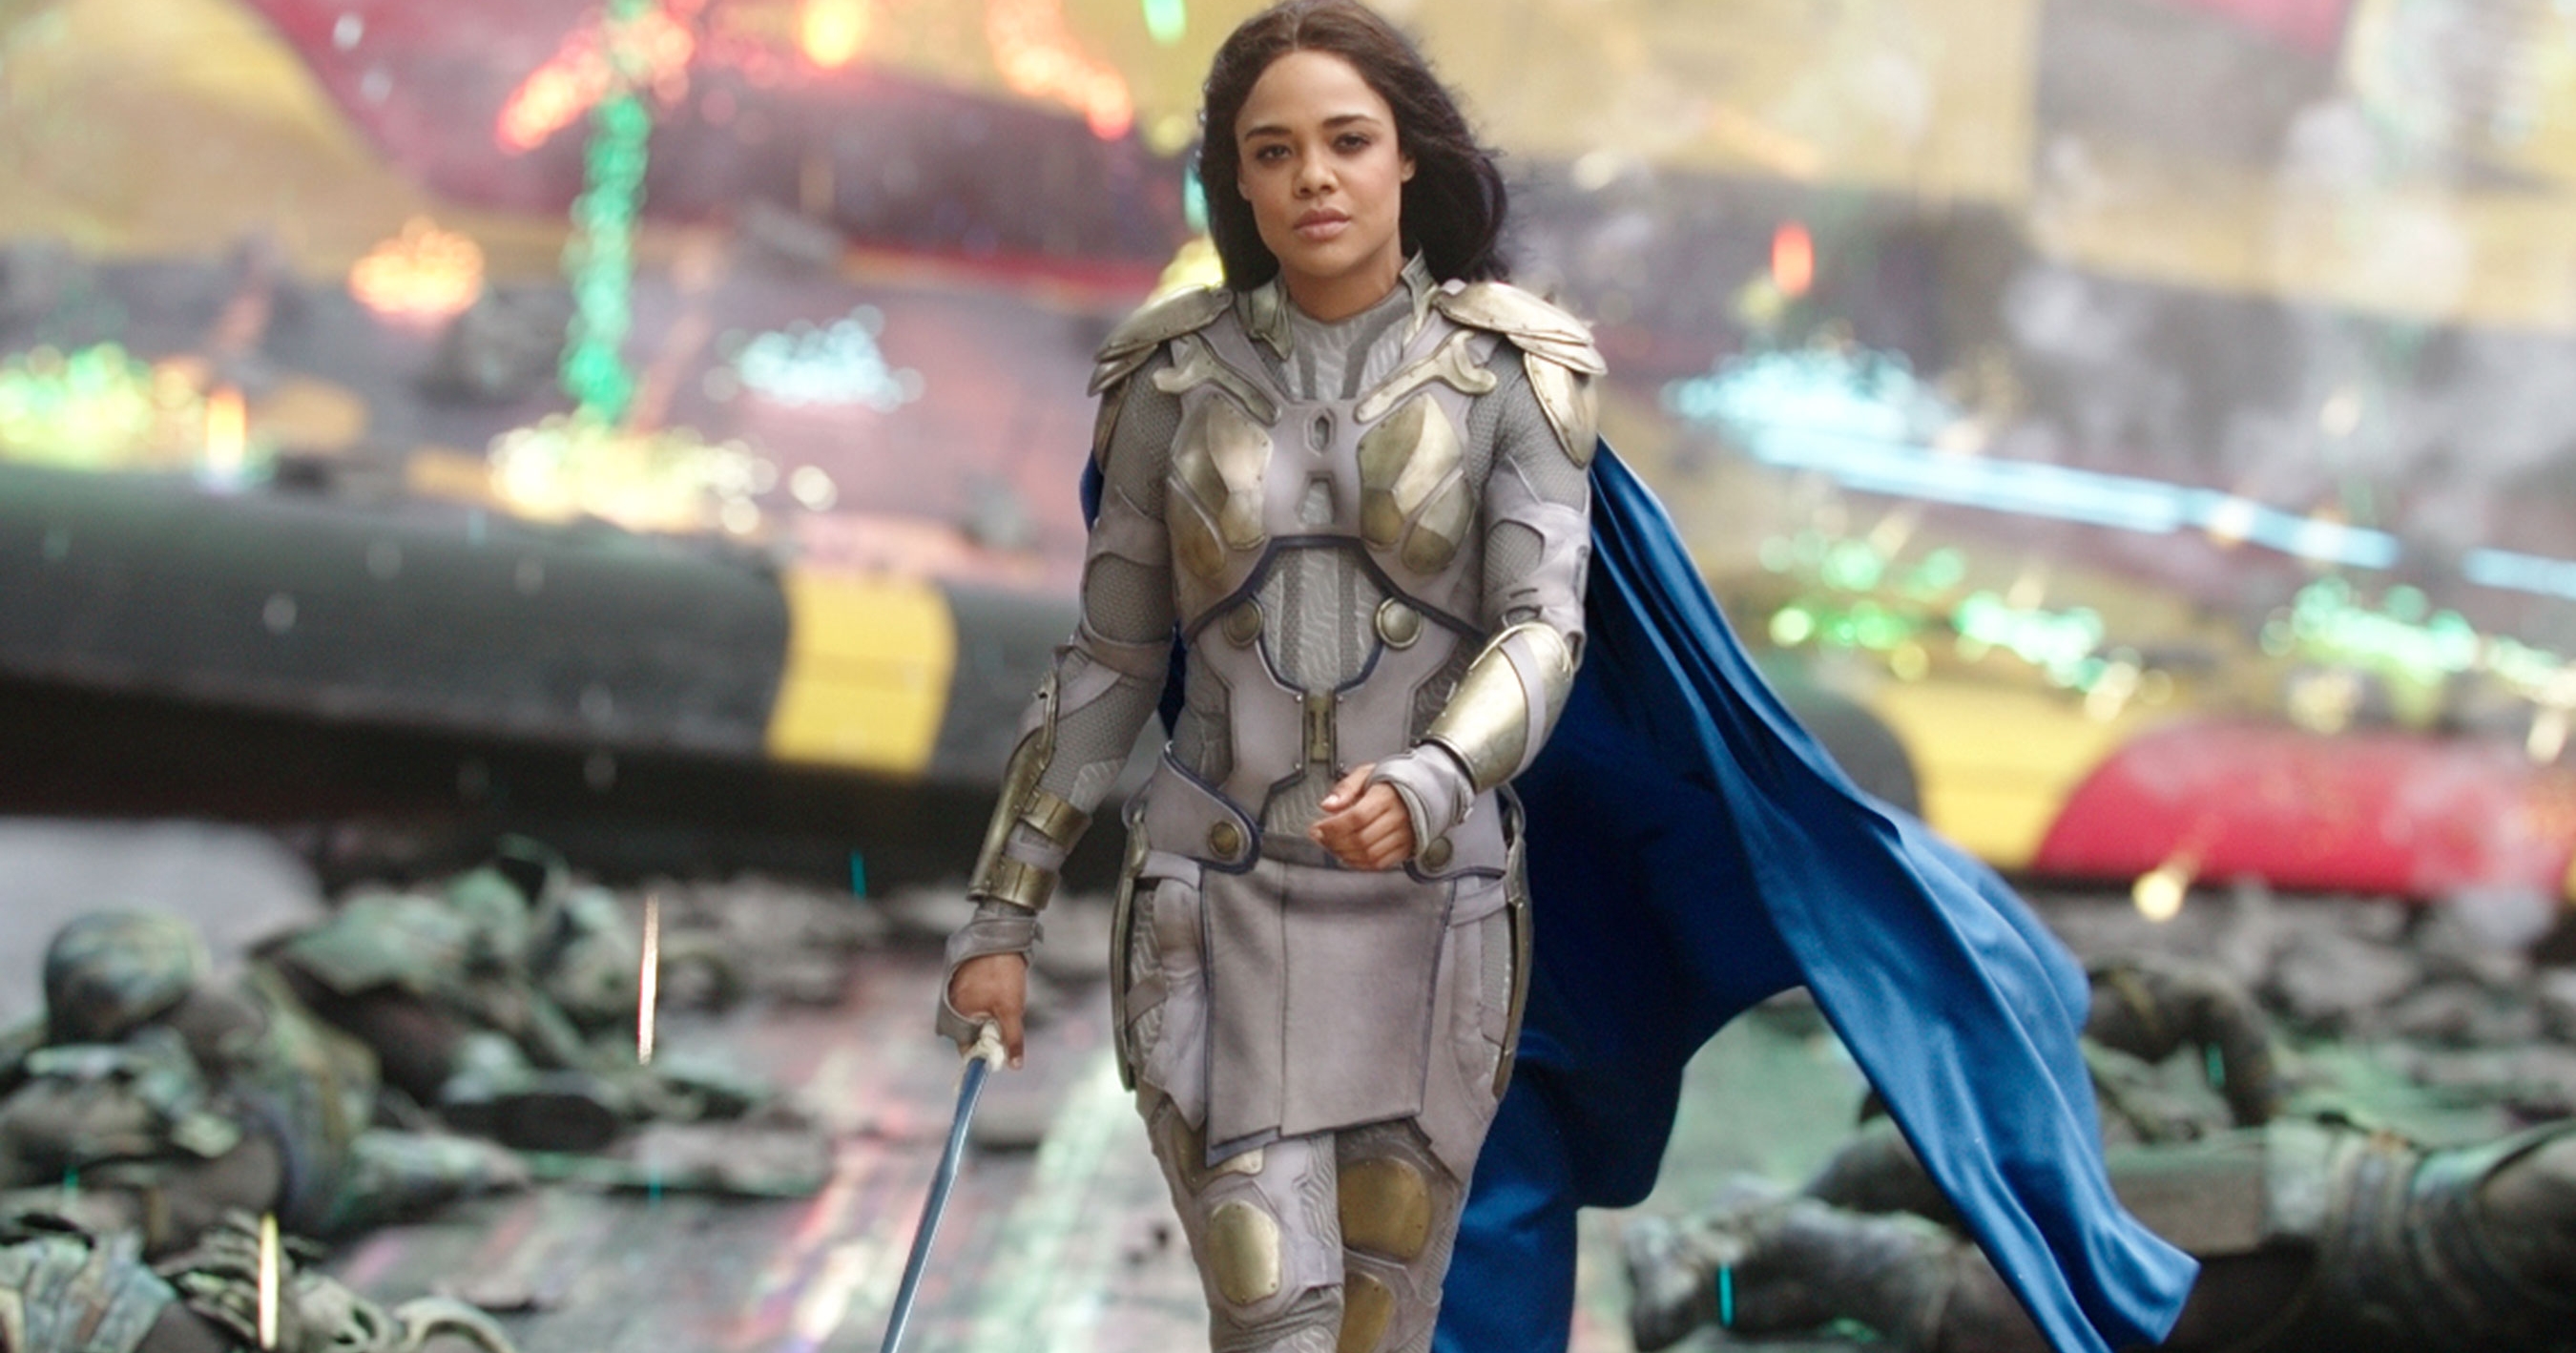 Valkyrie tells the leader of Sakaar she can bring back Thor in how many hours? 